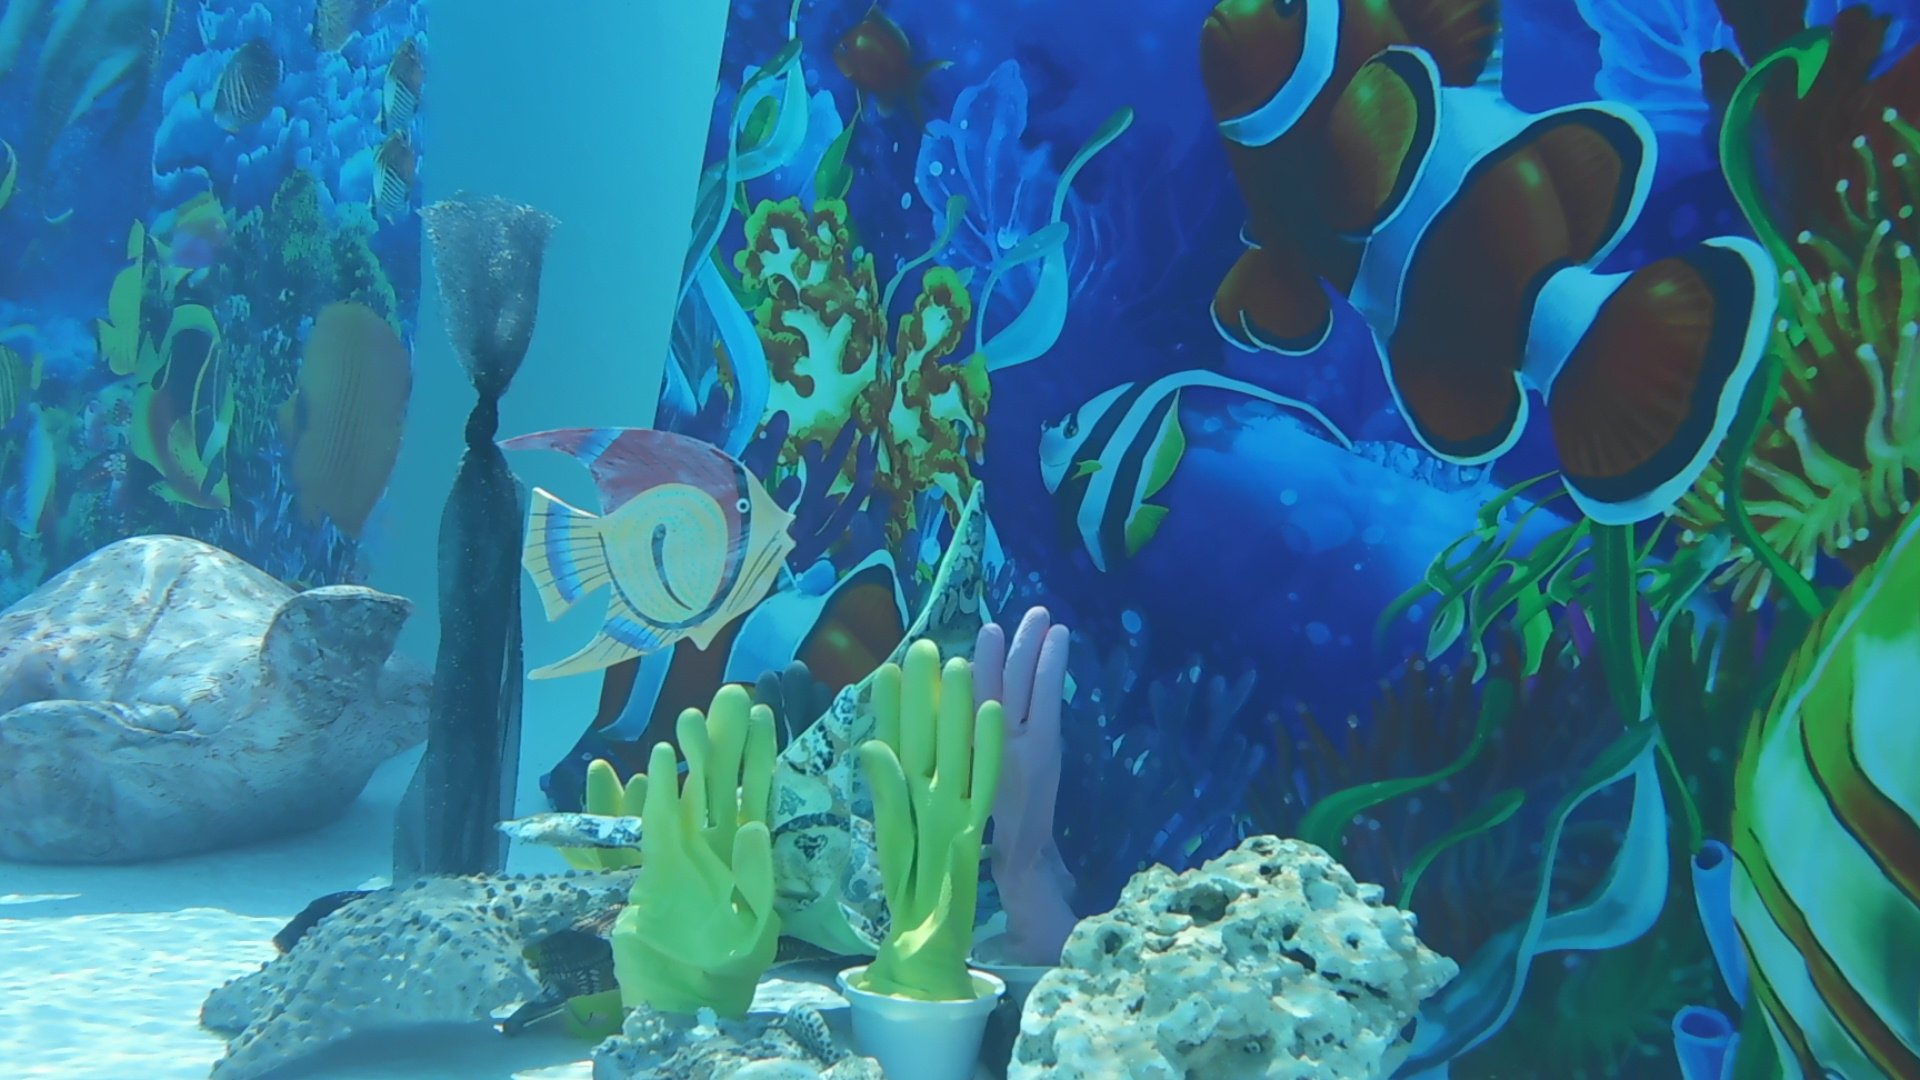 rubber glove coral with curtain - Copy.JPG